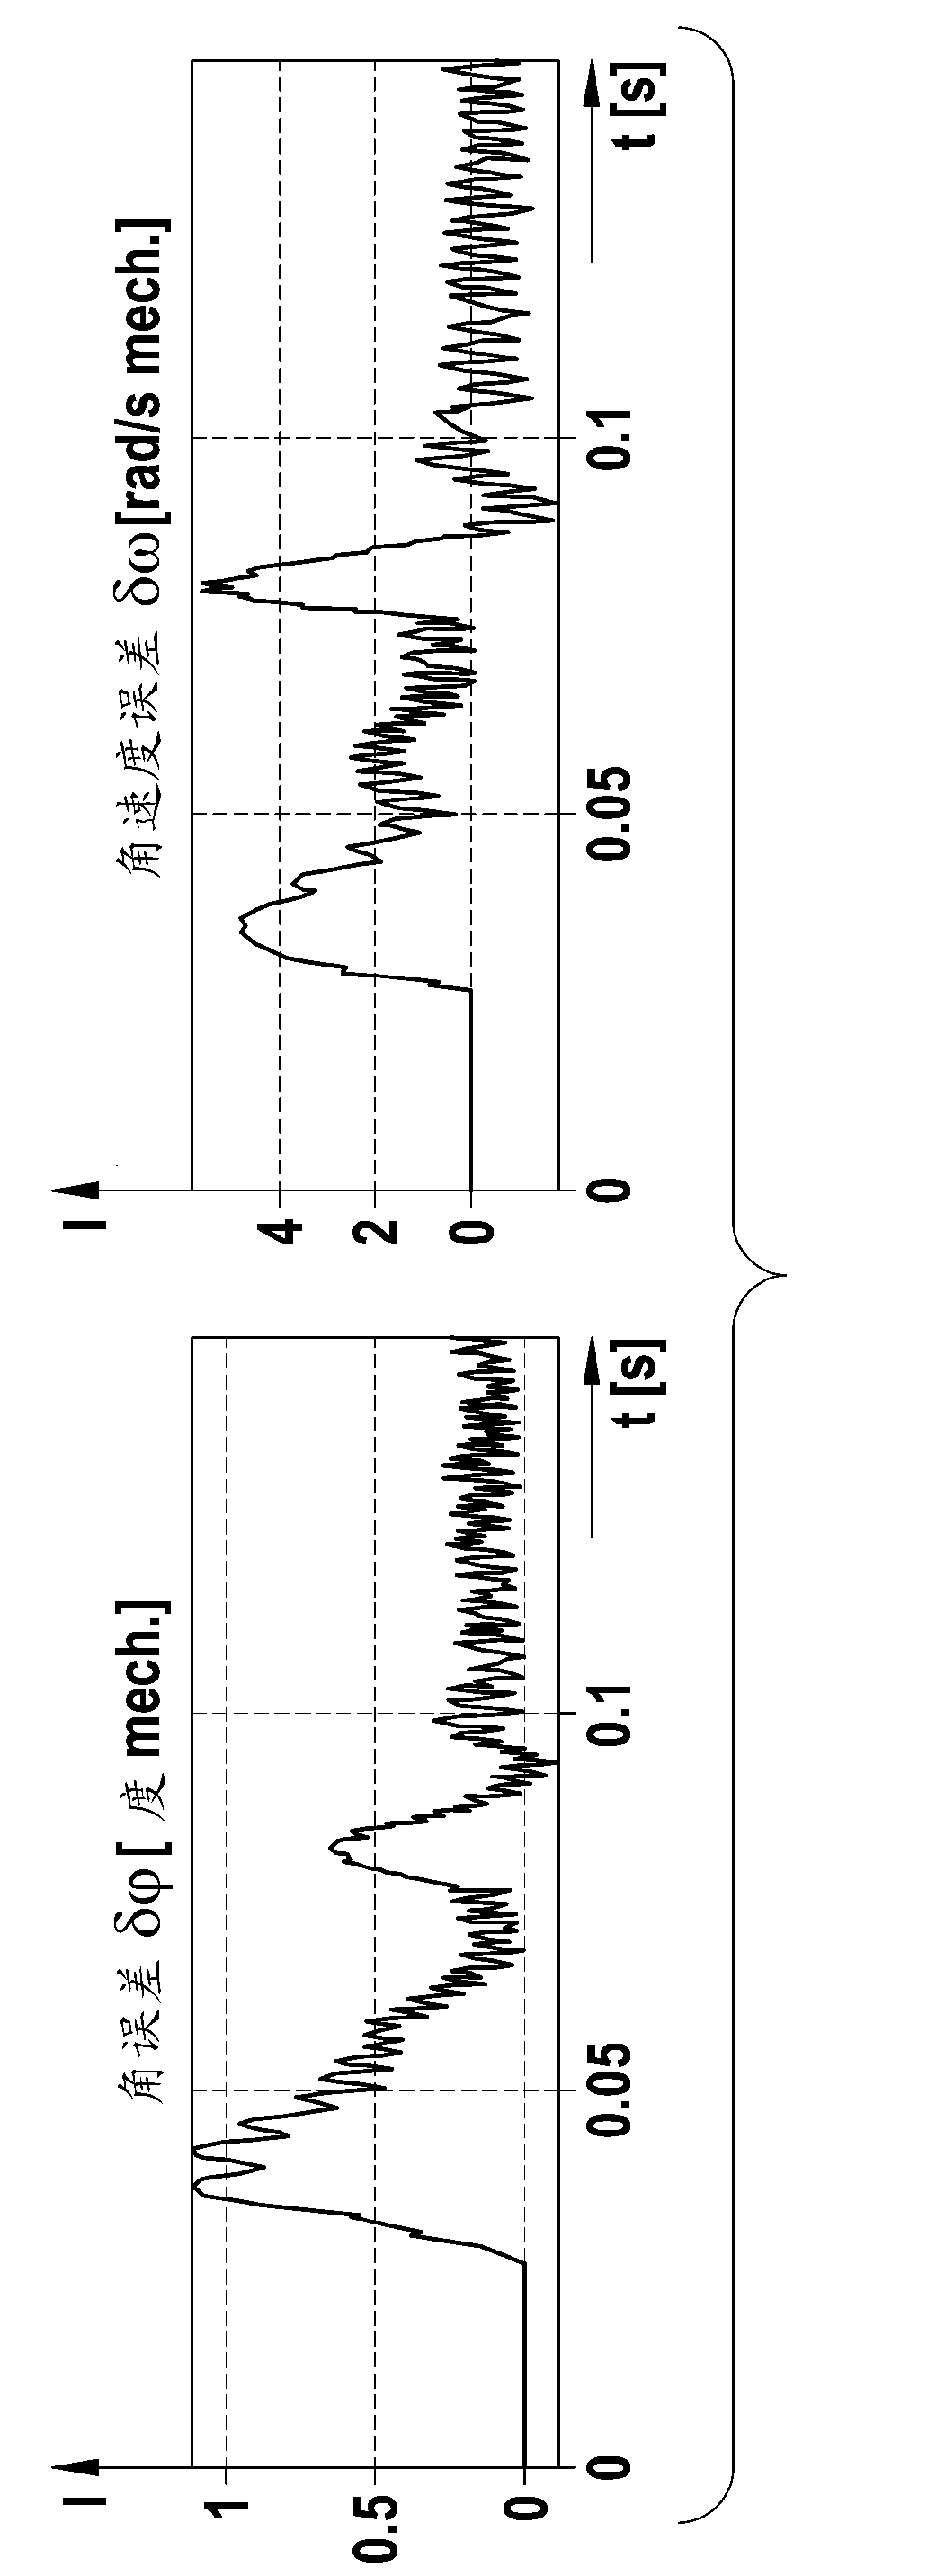 Method and device for the angle sensor-free position detection of the rotor shaft of a permanently excited synchronous machine based on current signals and voltage signals